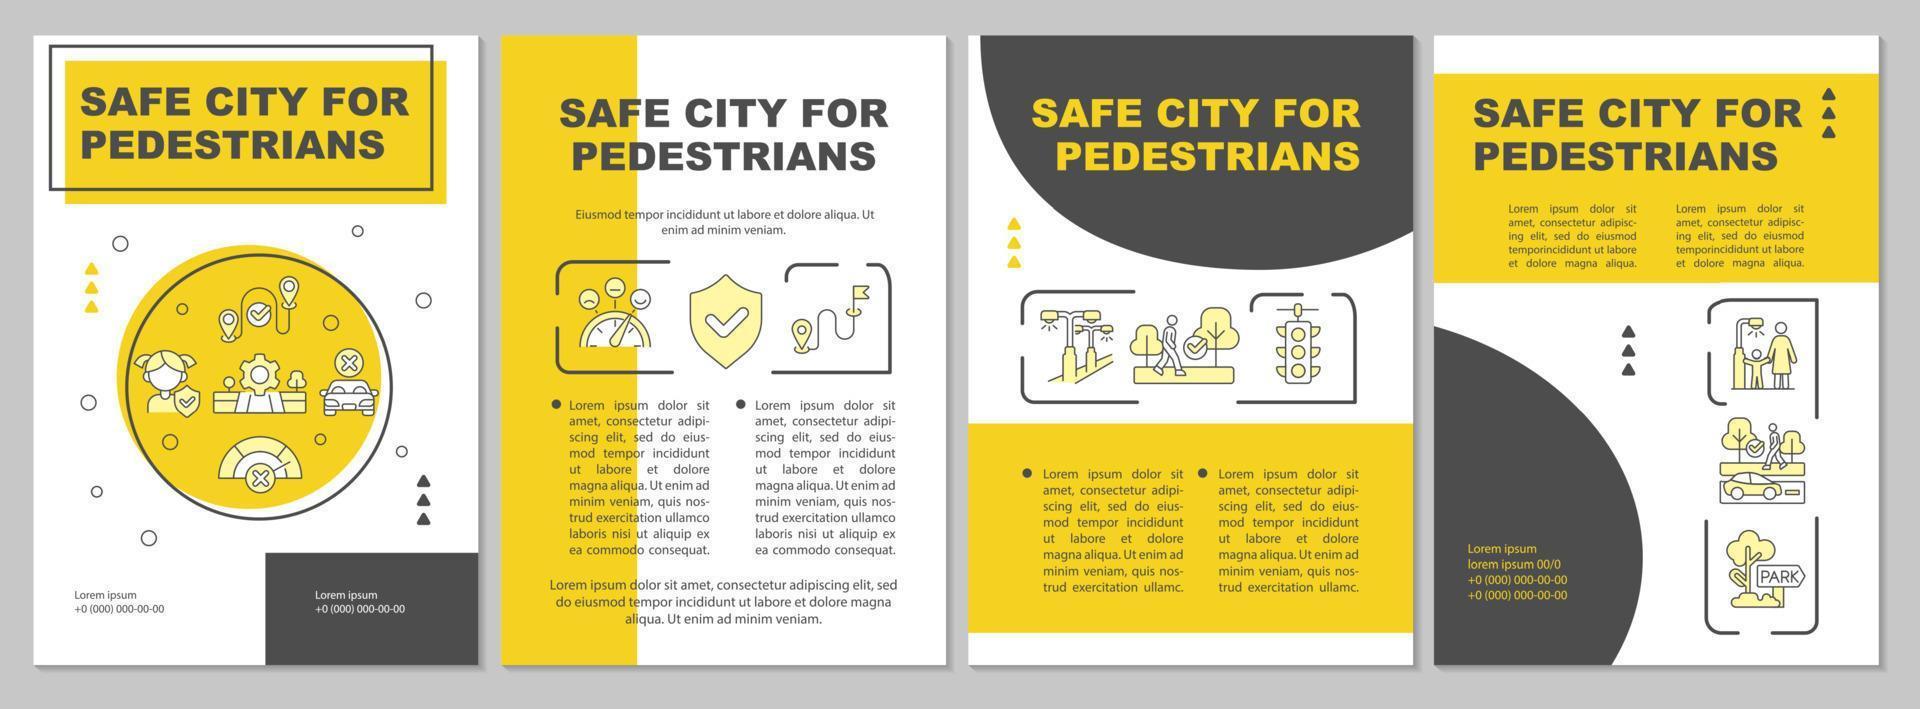 Pedestrian safety in city yellow brochure template. Urban planning. Leaflet design with linear icons. 4 vector layouts for presentation, annual reports.